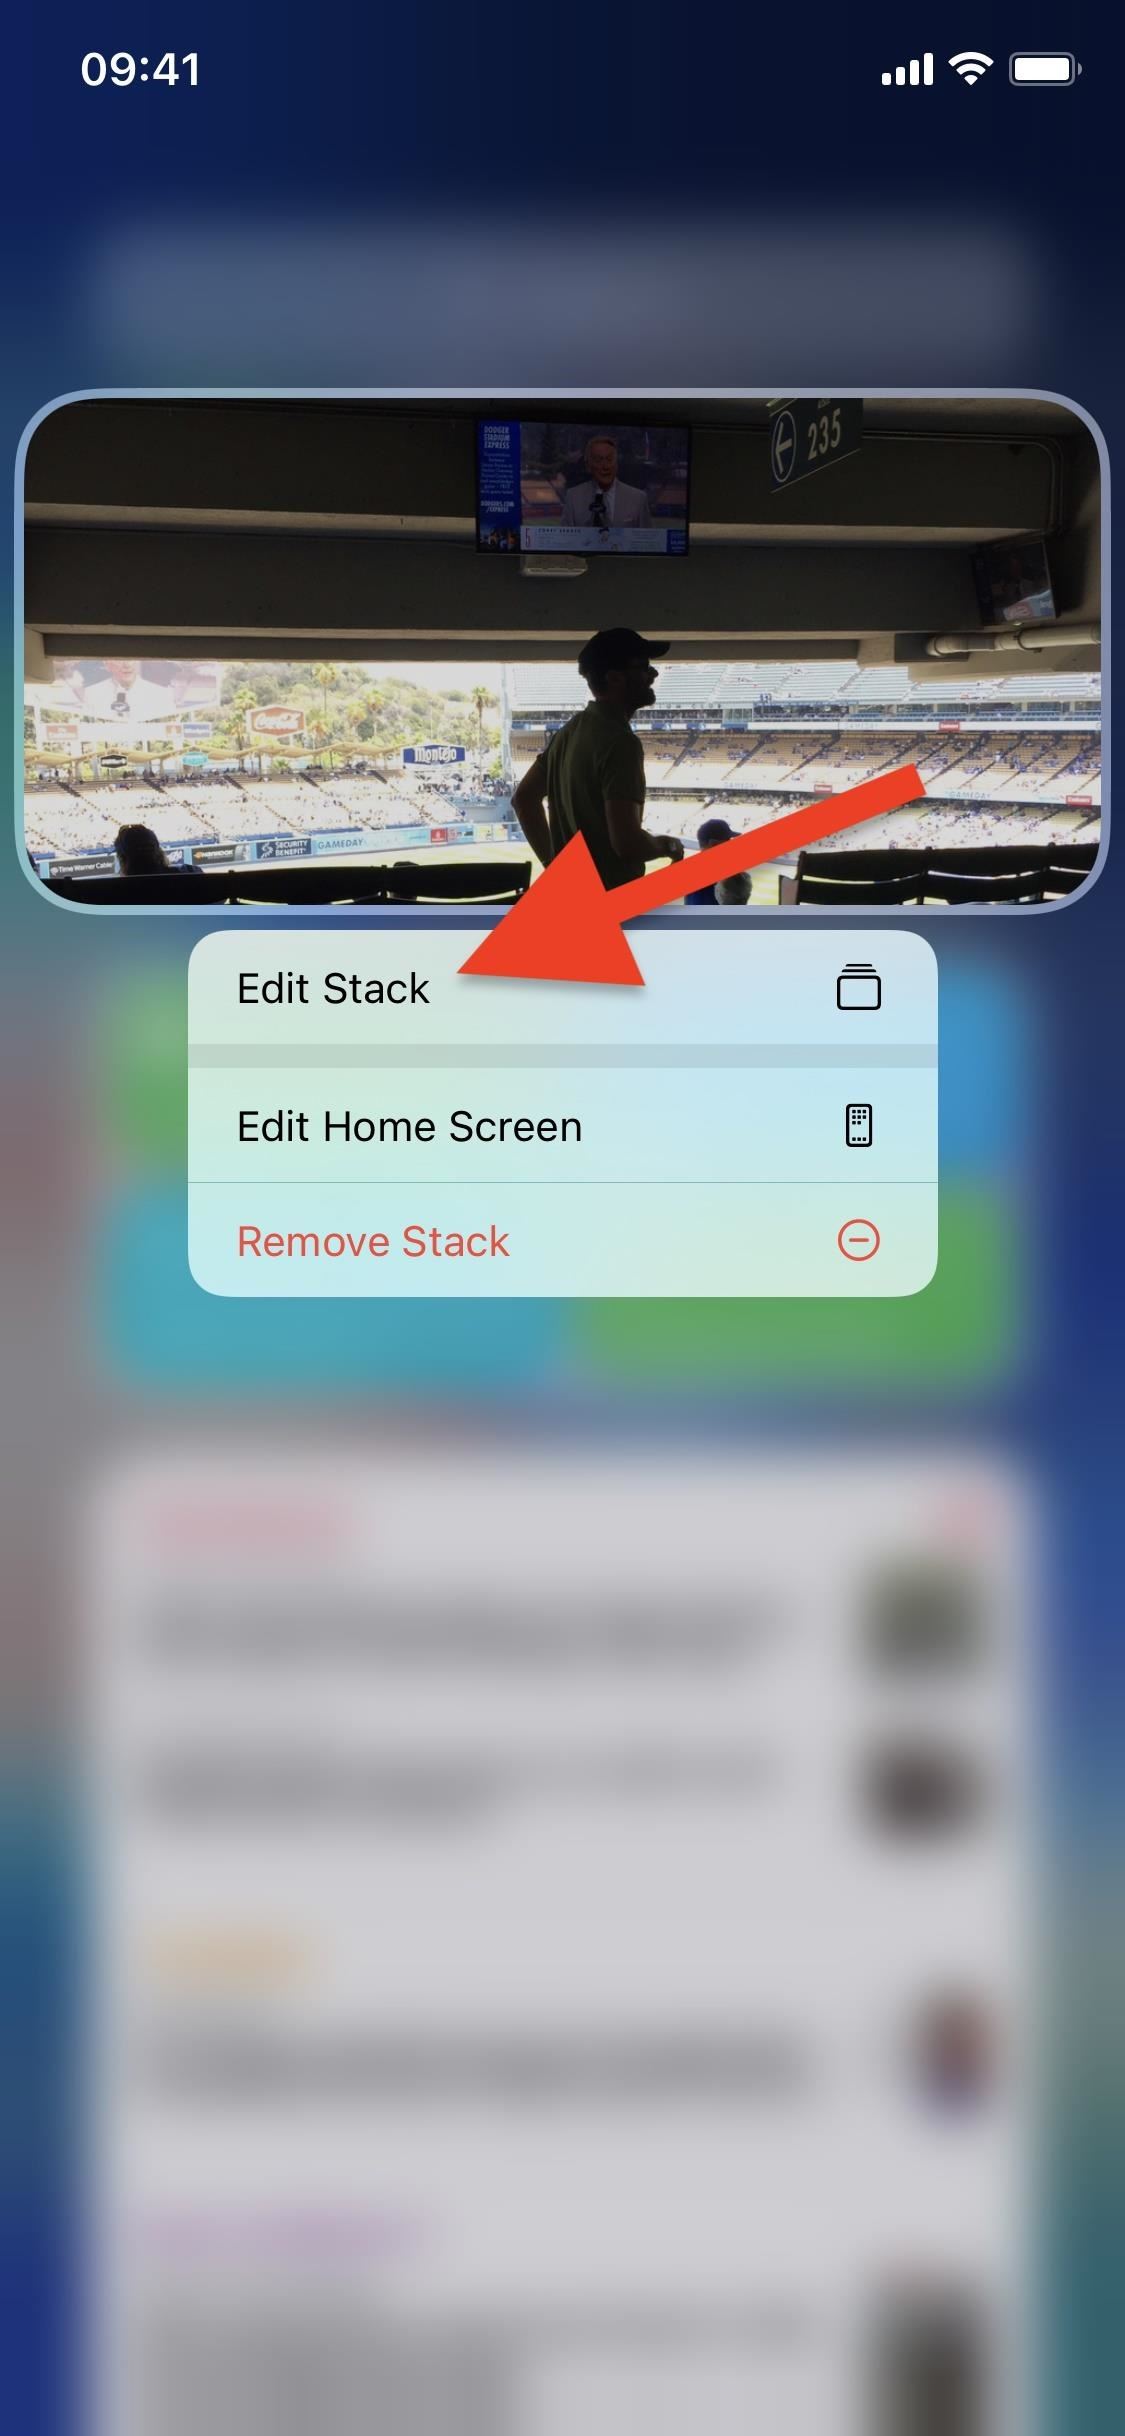 Remove the Annoying Photos Widget from Your iPhone's Today View to Stop Showing Potentially Embarrassing Pics